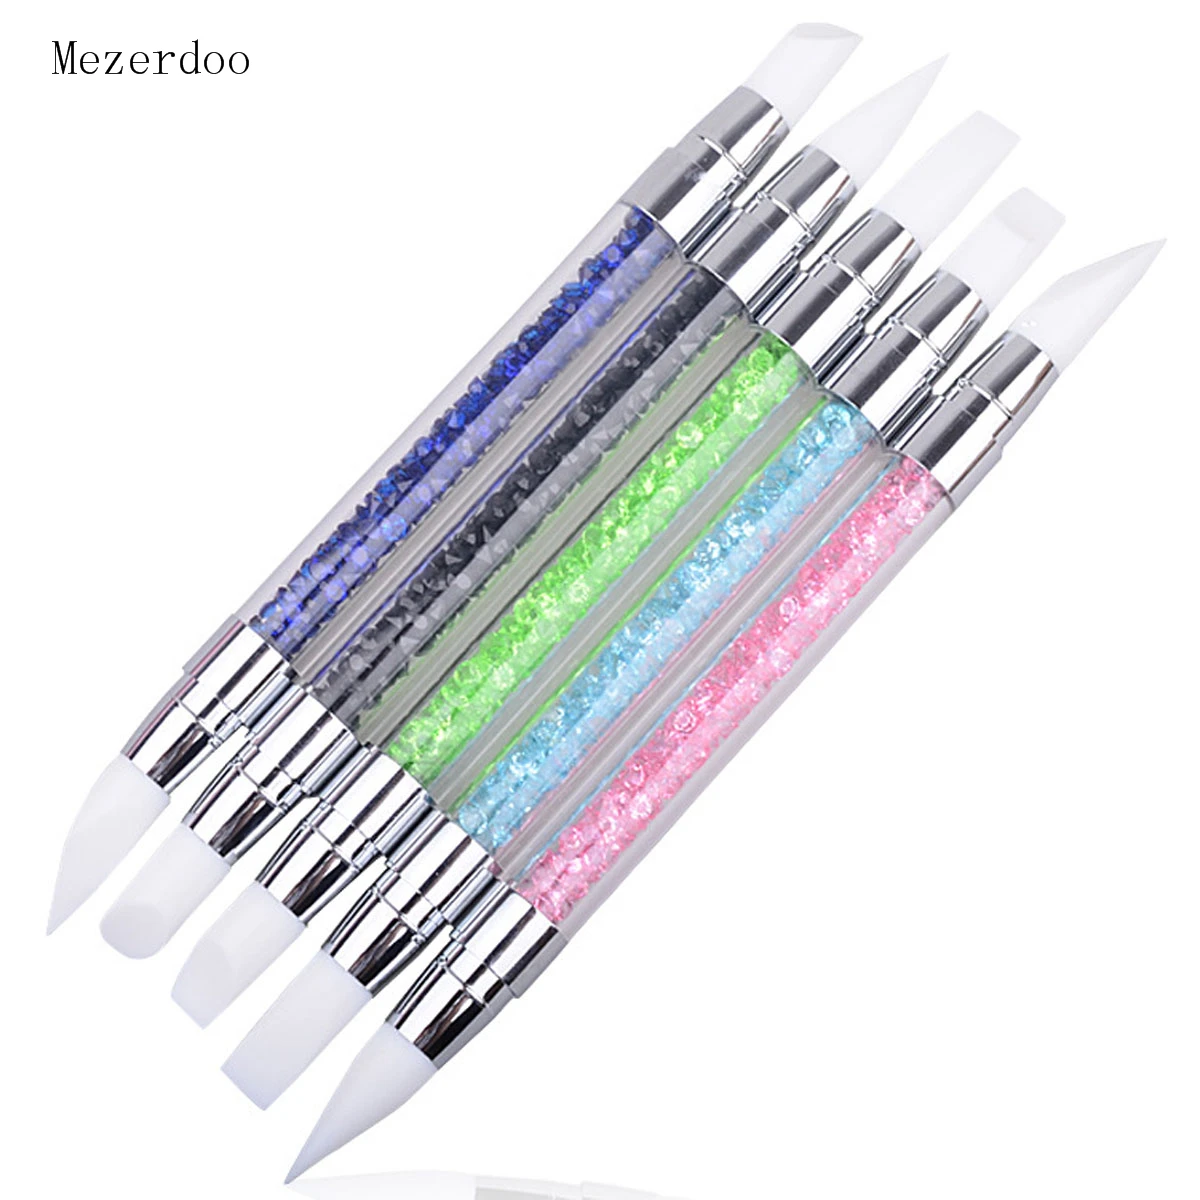 

5Pc Crystal Nail Art Brush Pen Silicone Head 2 Way Carving Emboss Shaping Hollow Sculpture Acrylic Brushes Manicure Dotting Tool